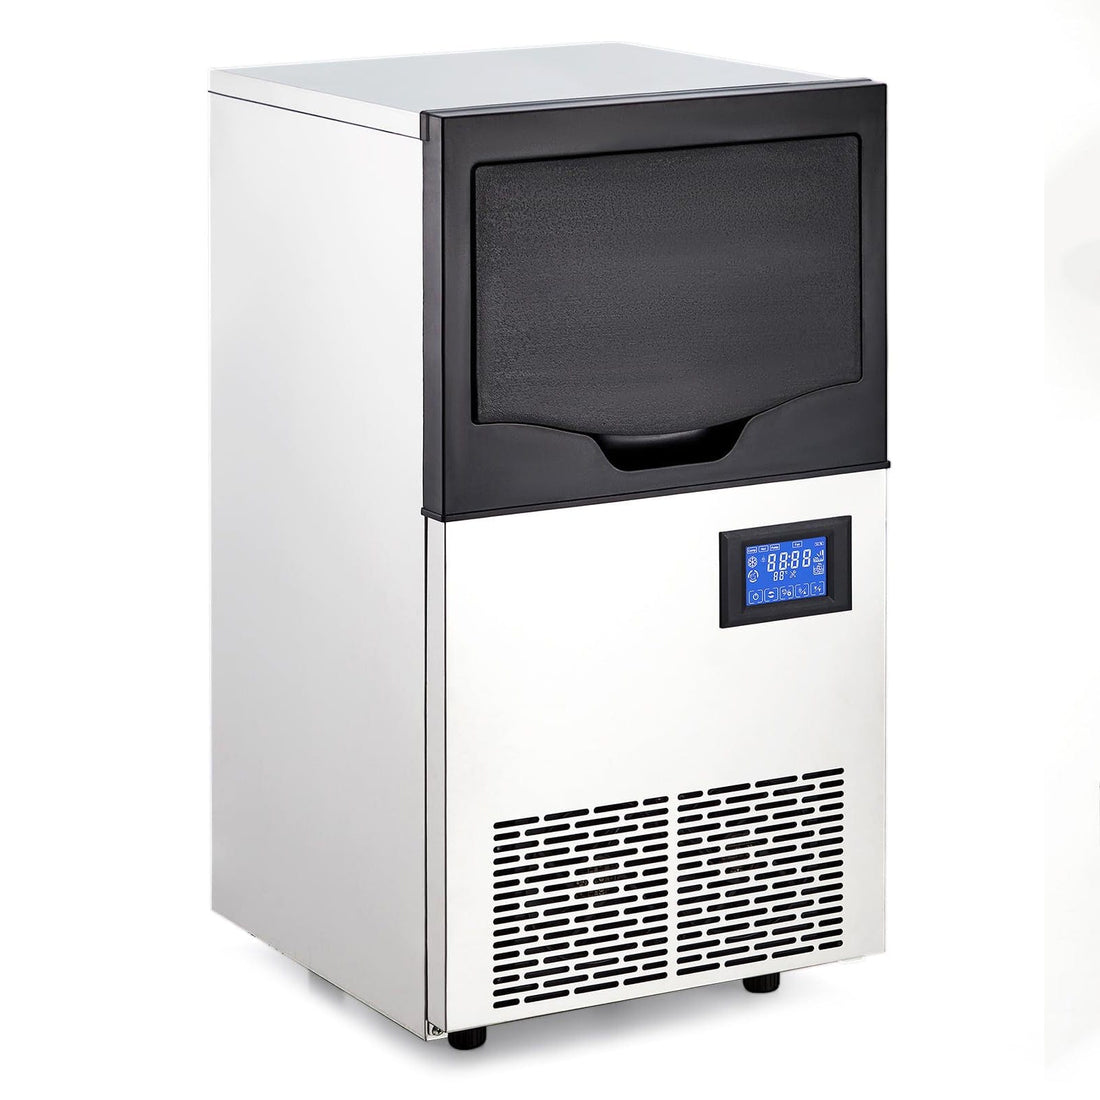 GARVEE 90Lbs/24H,Commercial Ice Maker,30Lbs Storage,Self-Cleaning, ice Cube maker,Freestanding/Under Counter,Ideal for Bars,Cafes,Offices